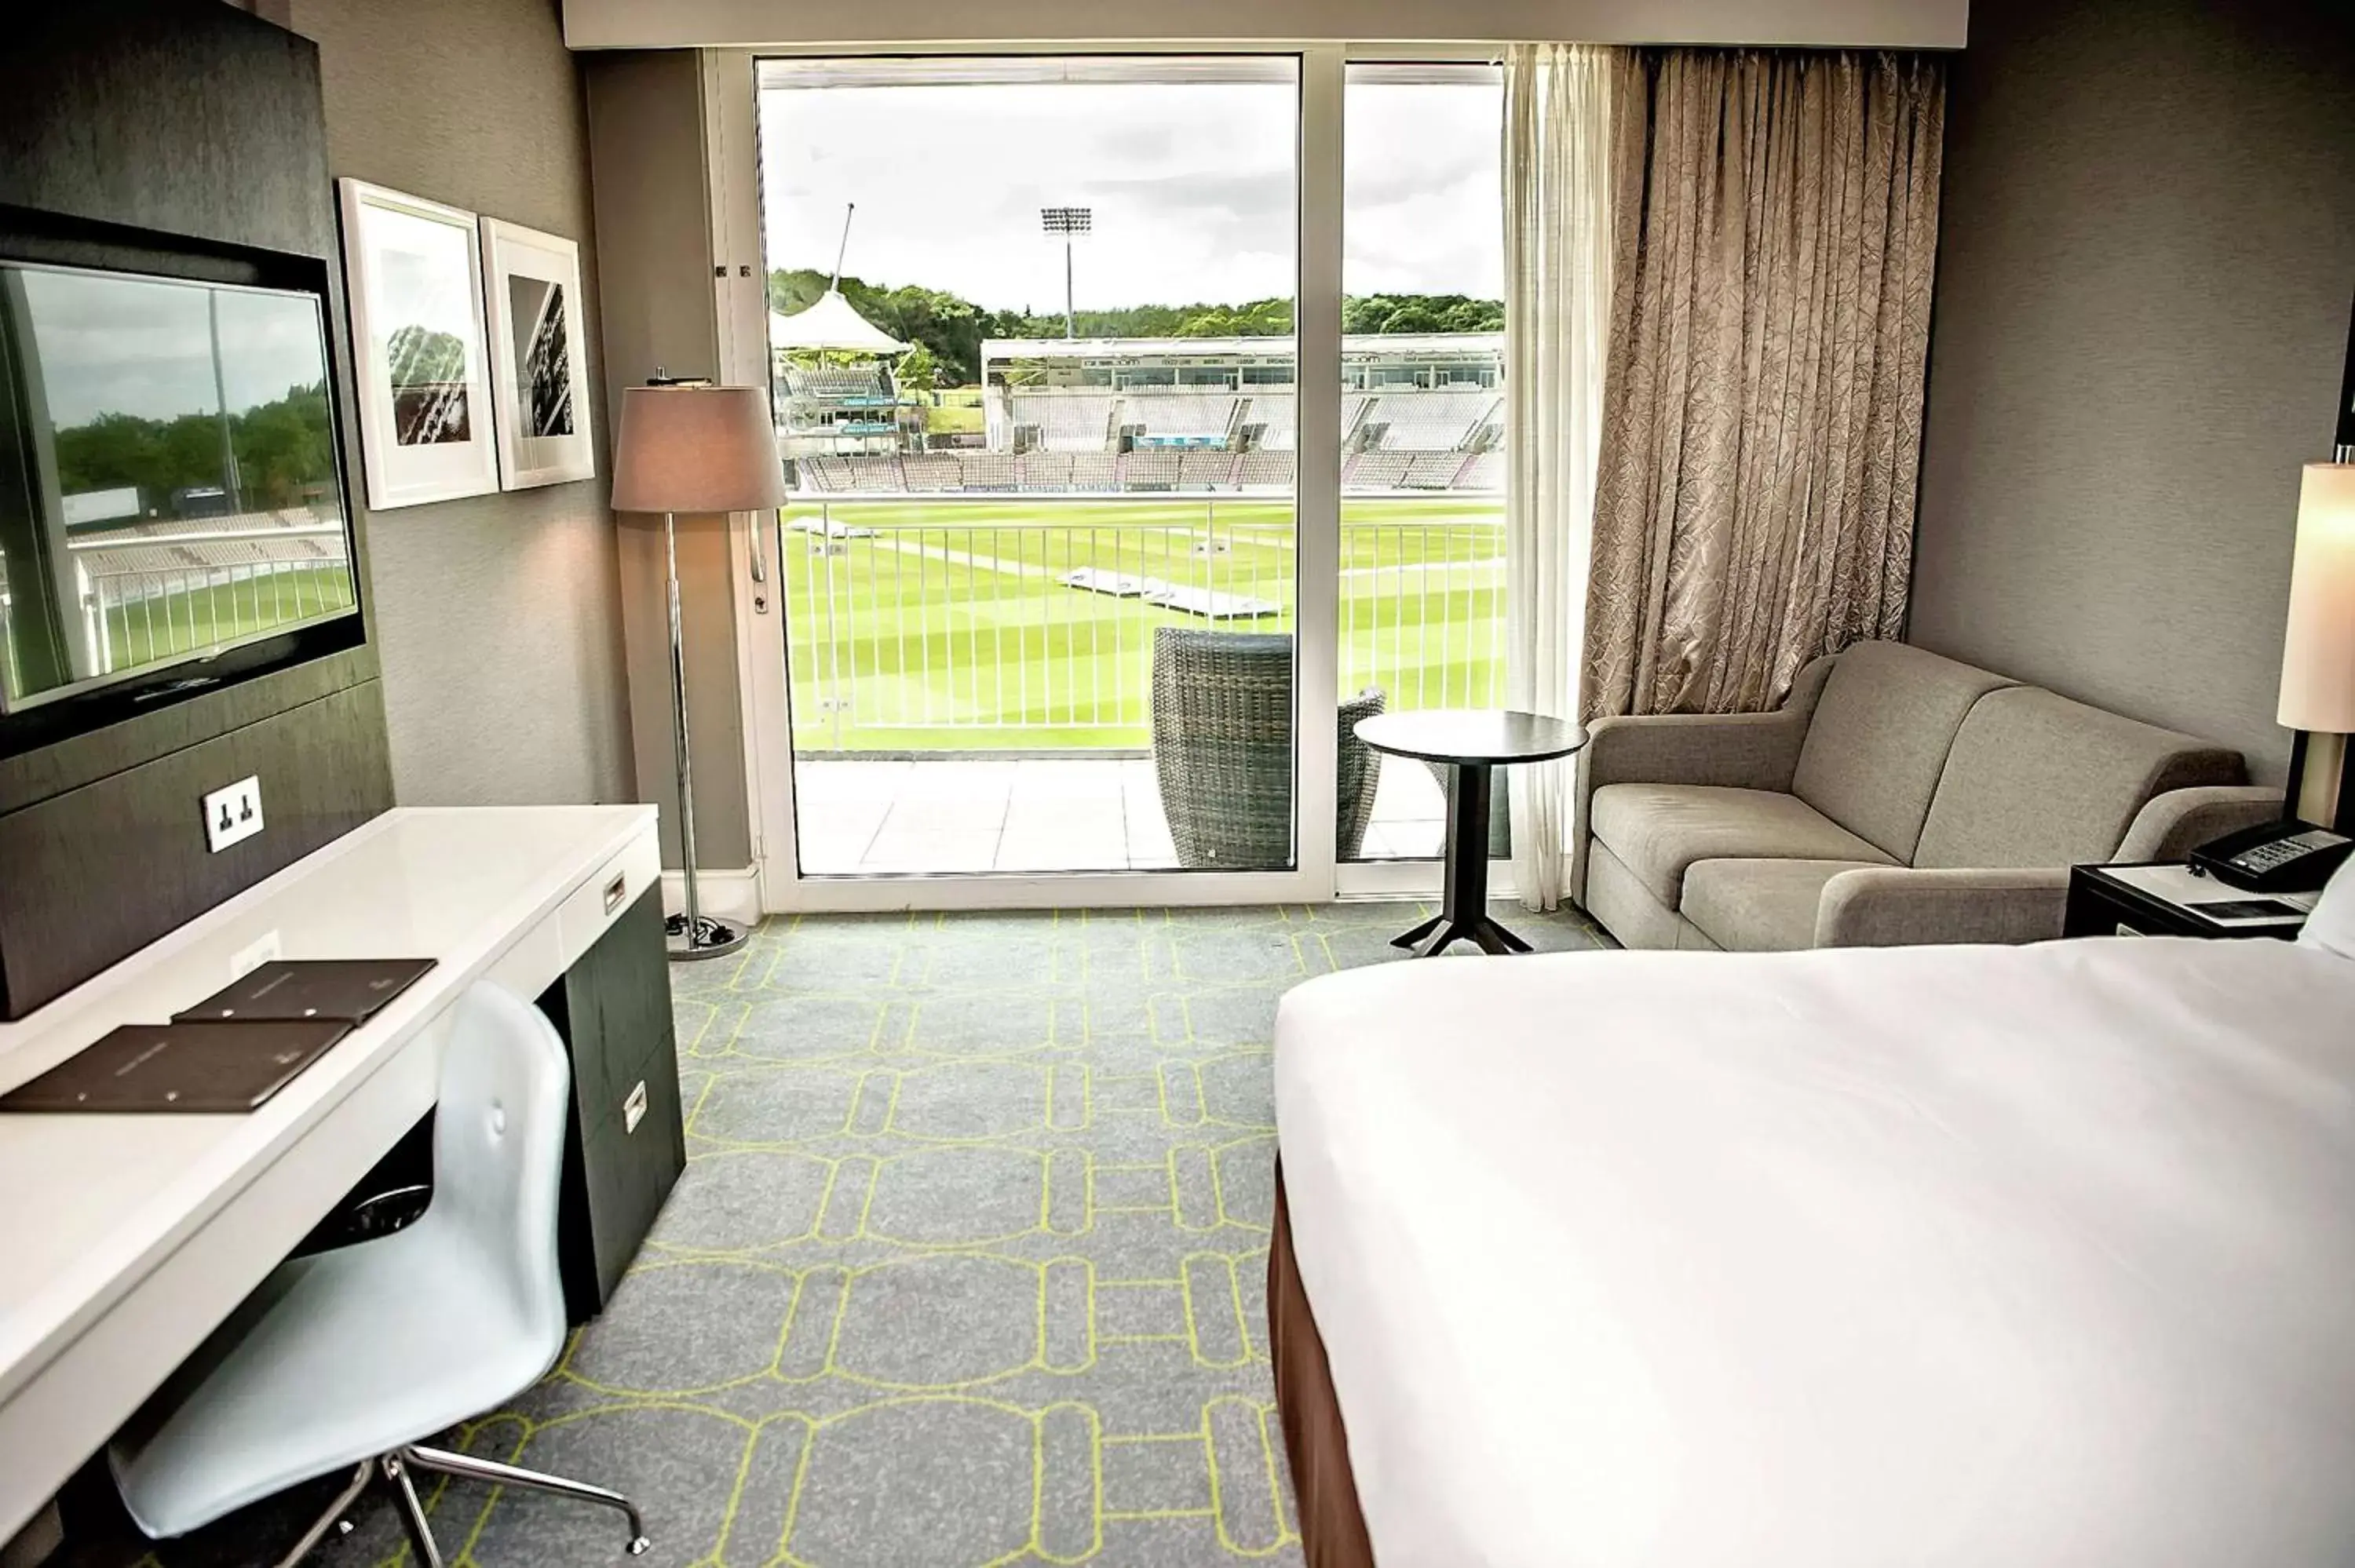 Bedroom in Hilton at the Ageas Bowl, Southampton